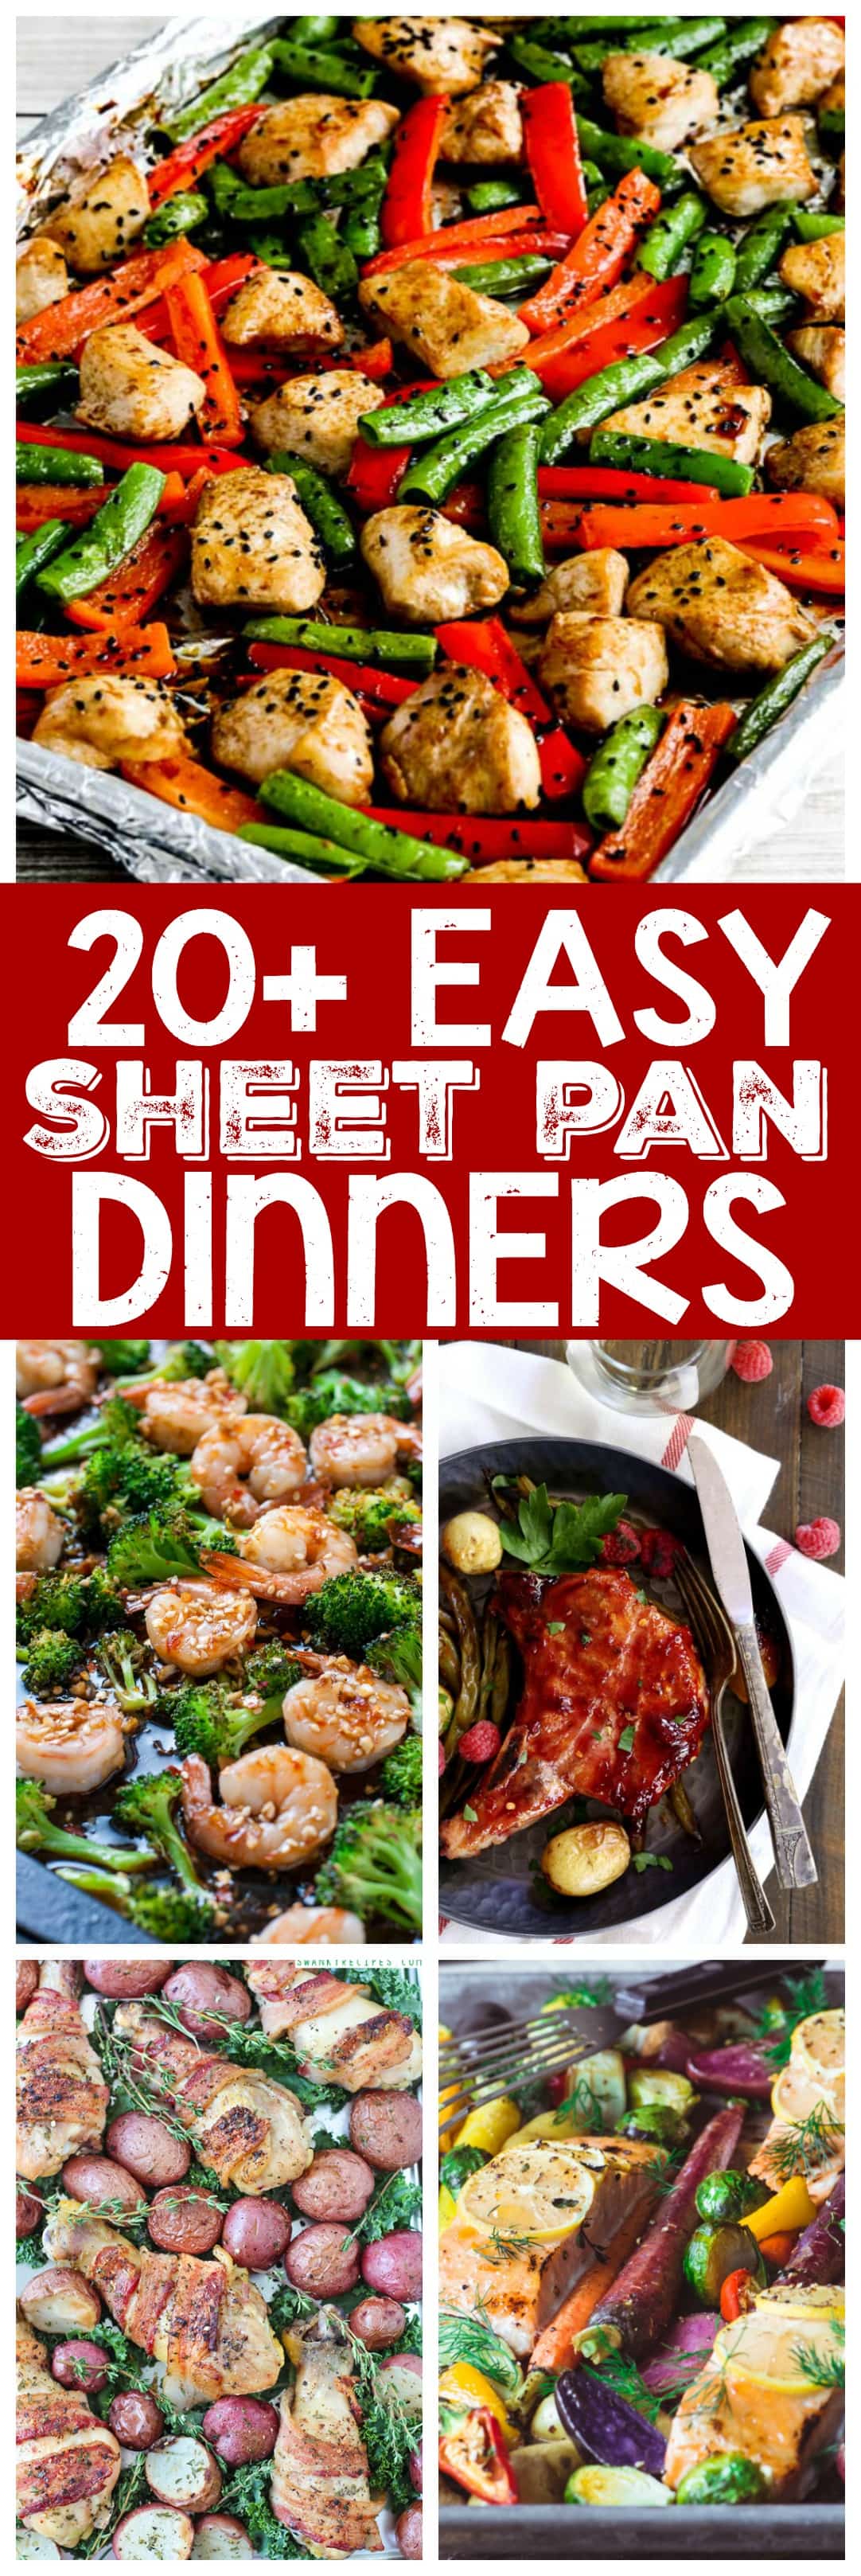 20+ Easy Sheet Pan Dinners - From chicken and potatoes to fish and vegetables, this collection has something for everyone to help make dinner time a breeze!